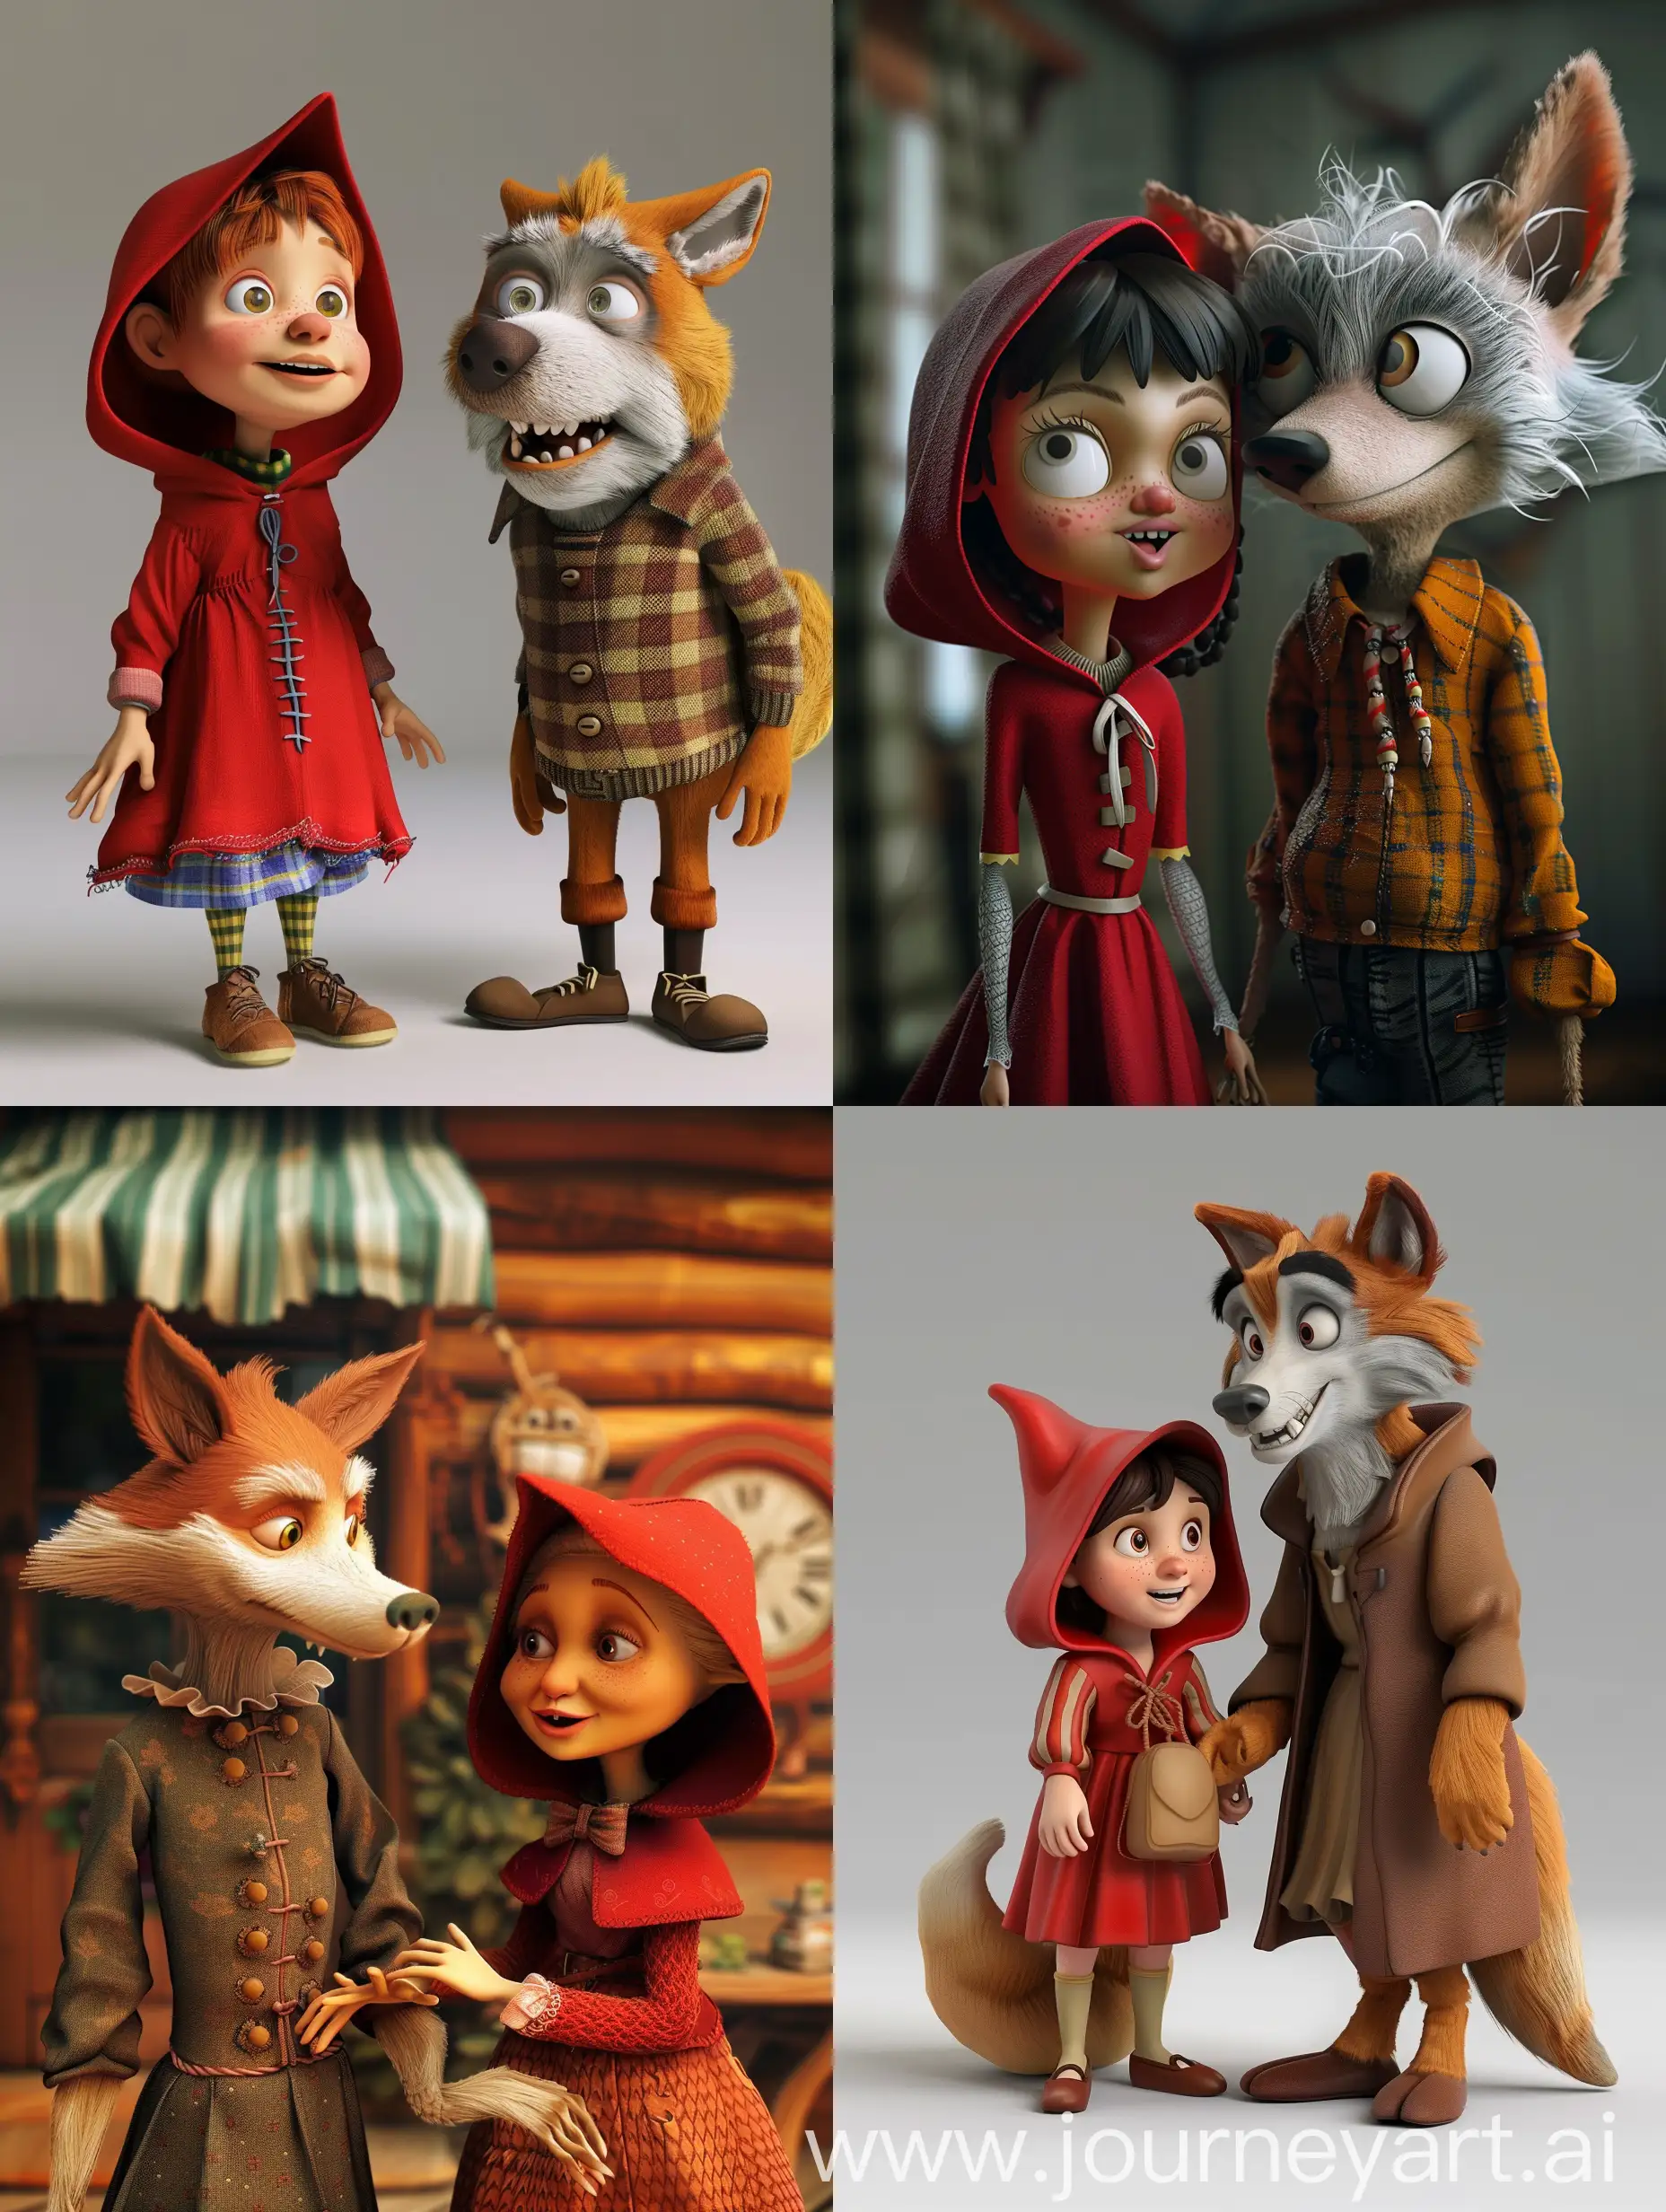 Disney-Cartoon-Characters-Little-Red-Riding-Hood-and-the-Wolf-Grandma-3D-Artwork